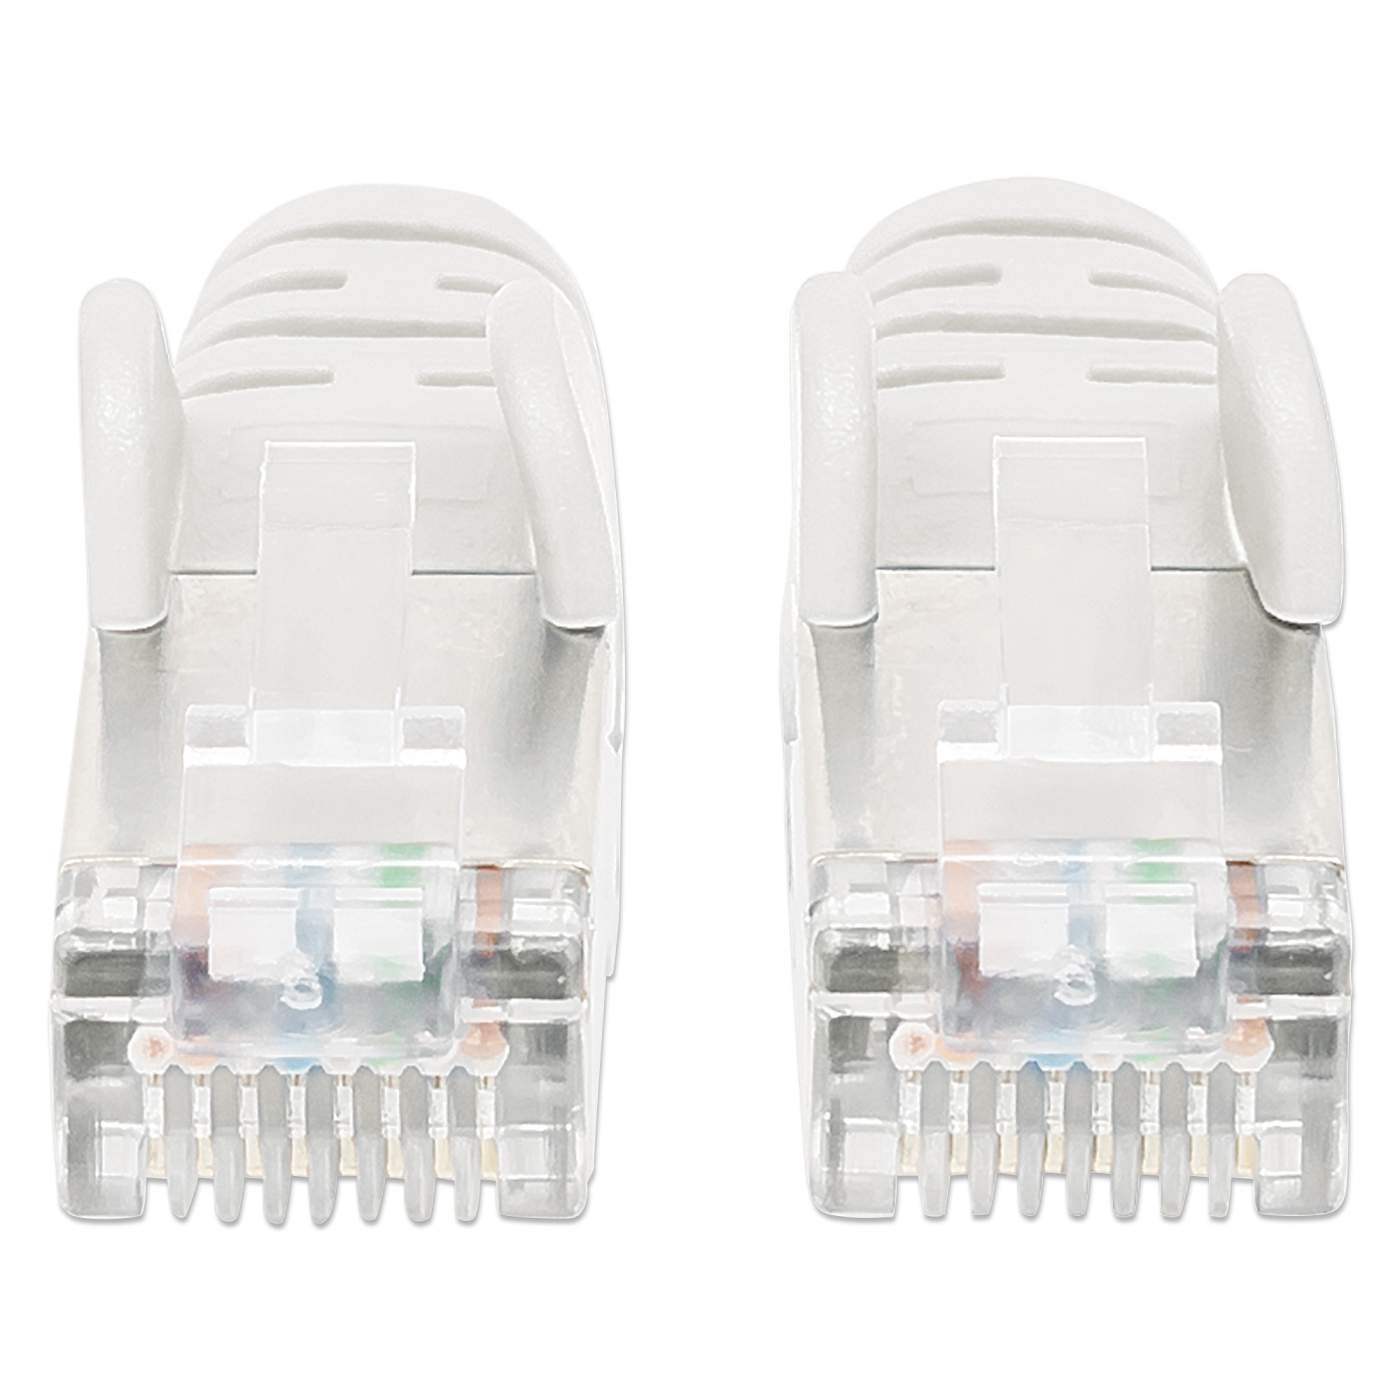 Cat6a S/FTP Network Patch Cable, 5 ft., White Image 4